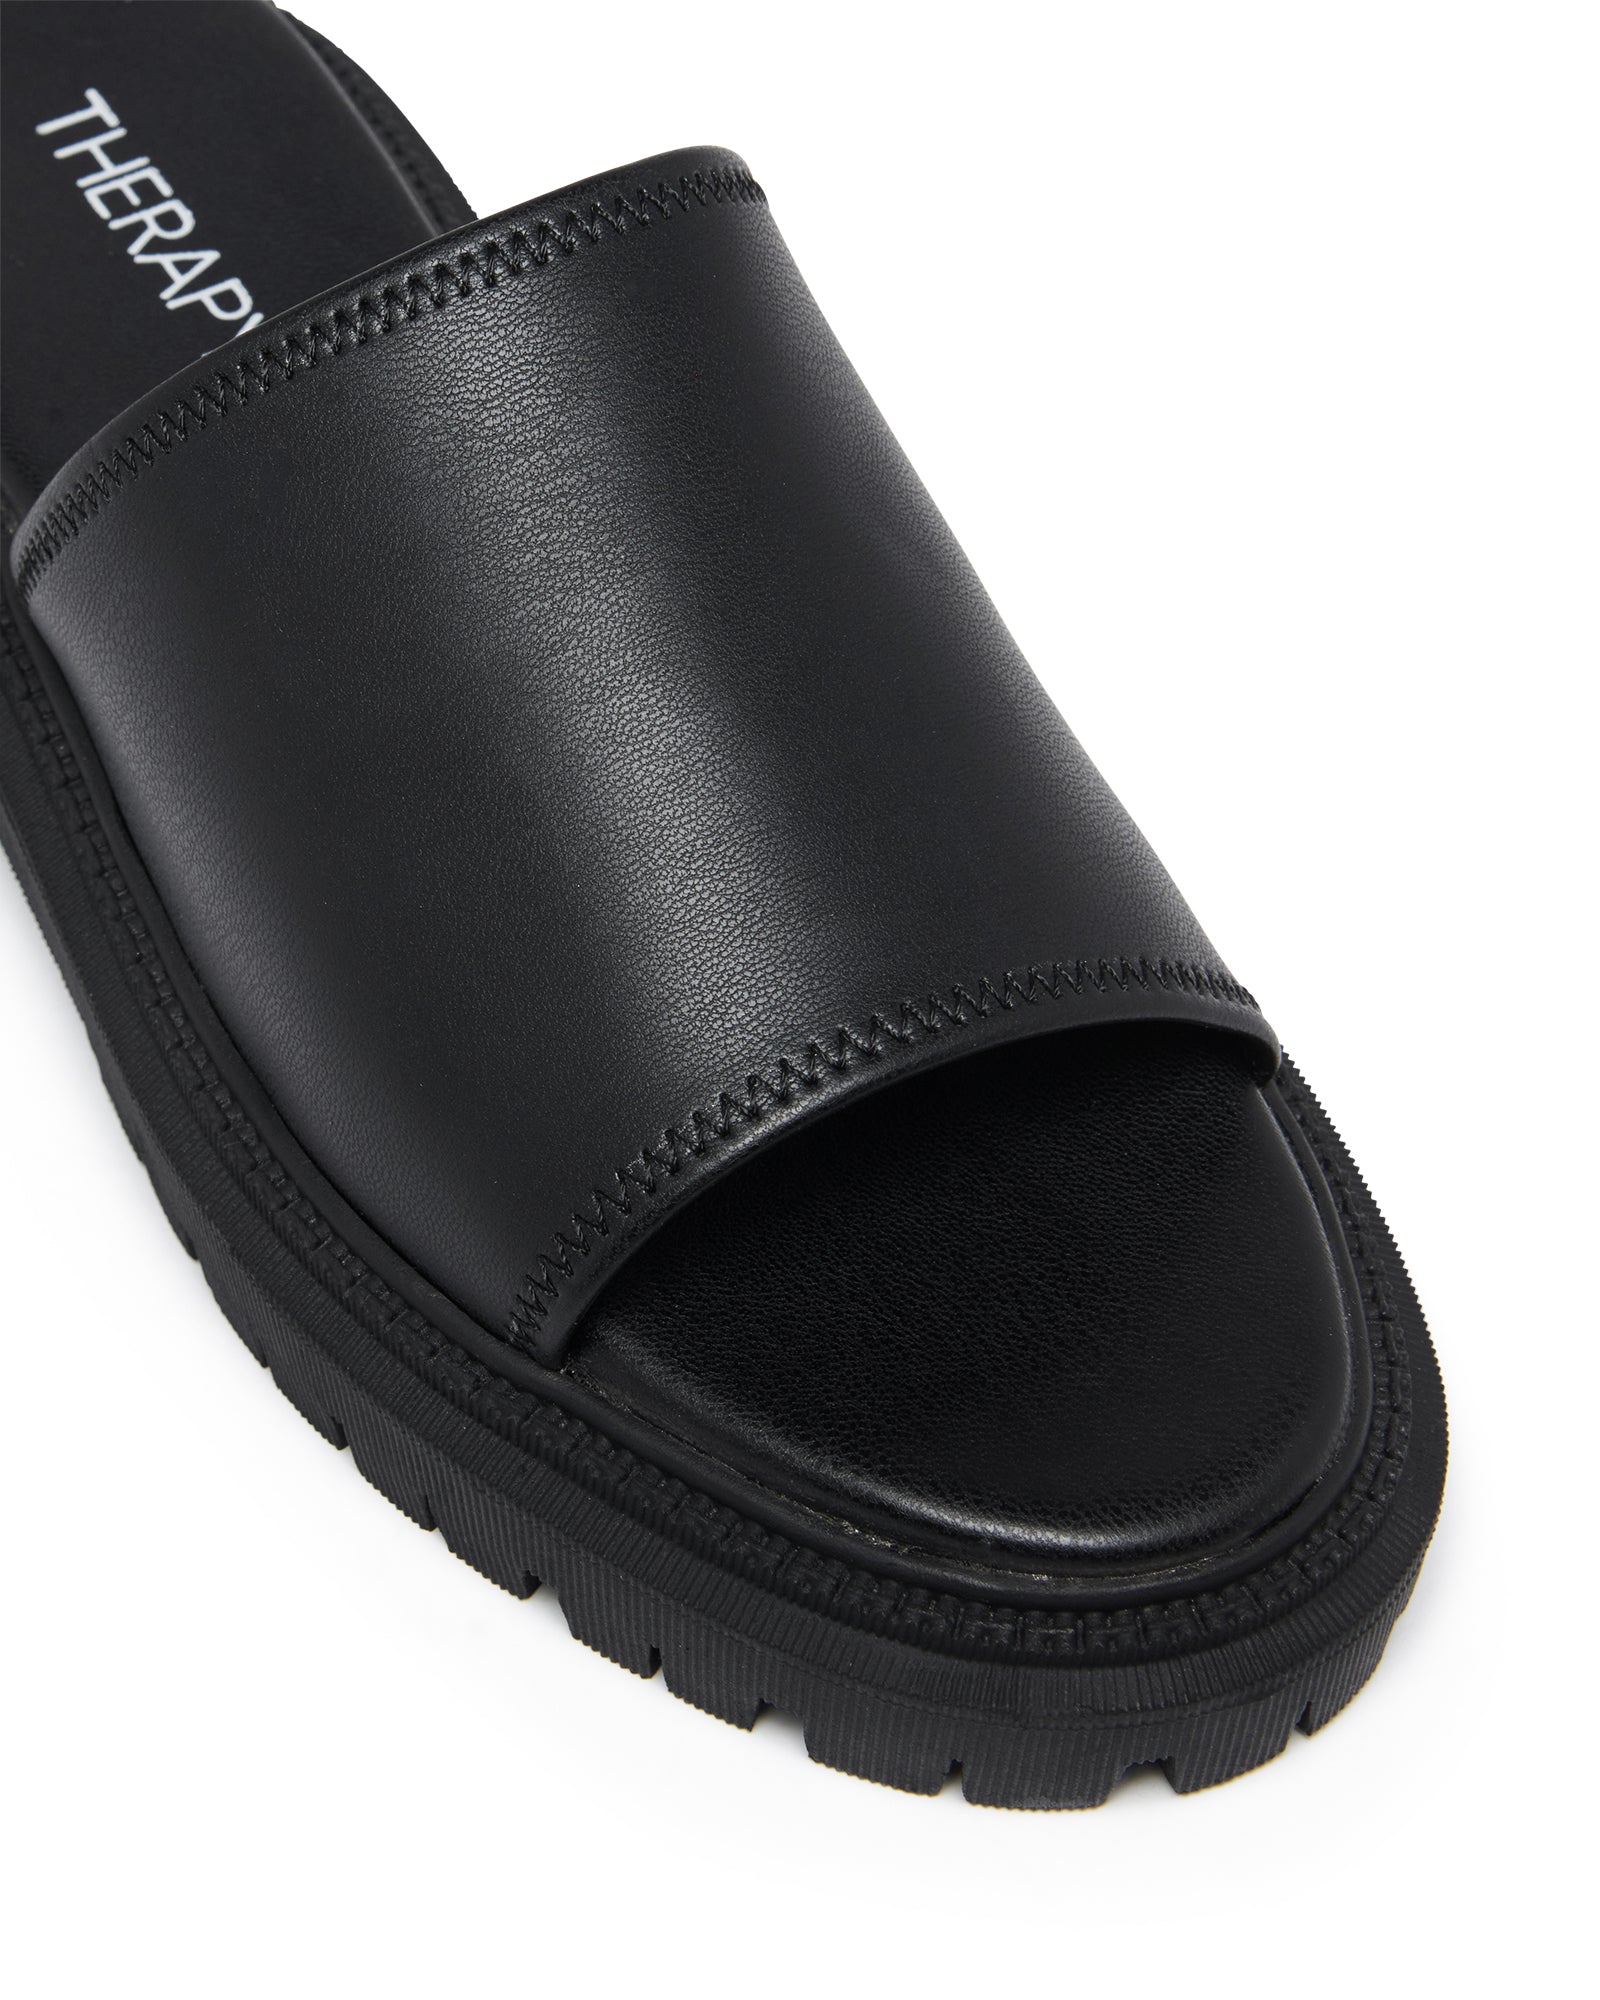 Therapy Shoes Exempt Black Stretch | Women's Sandals | Slides | Chunky